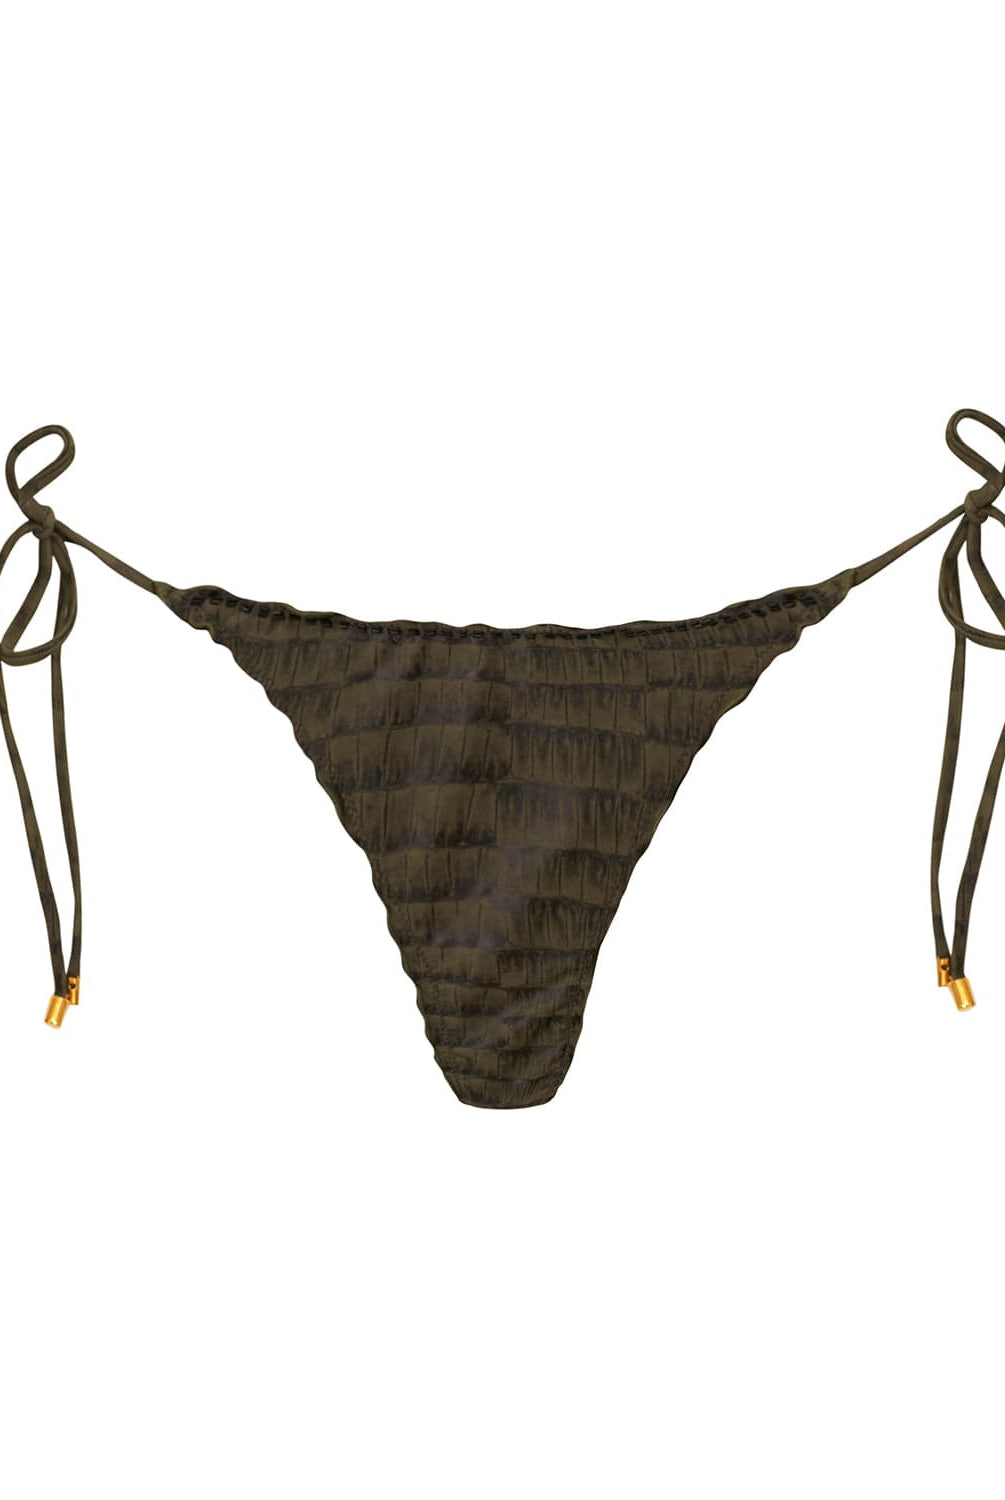 A textured gray triangle shape bikini bottom with ruffle details. Featured against a white wall background.